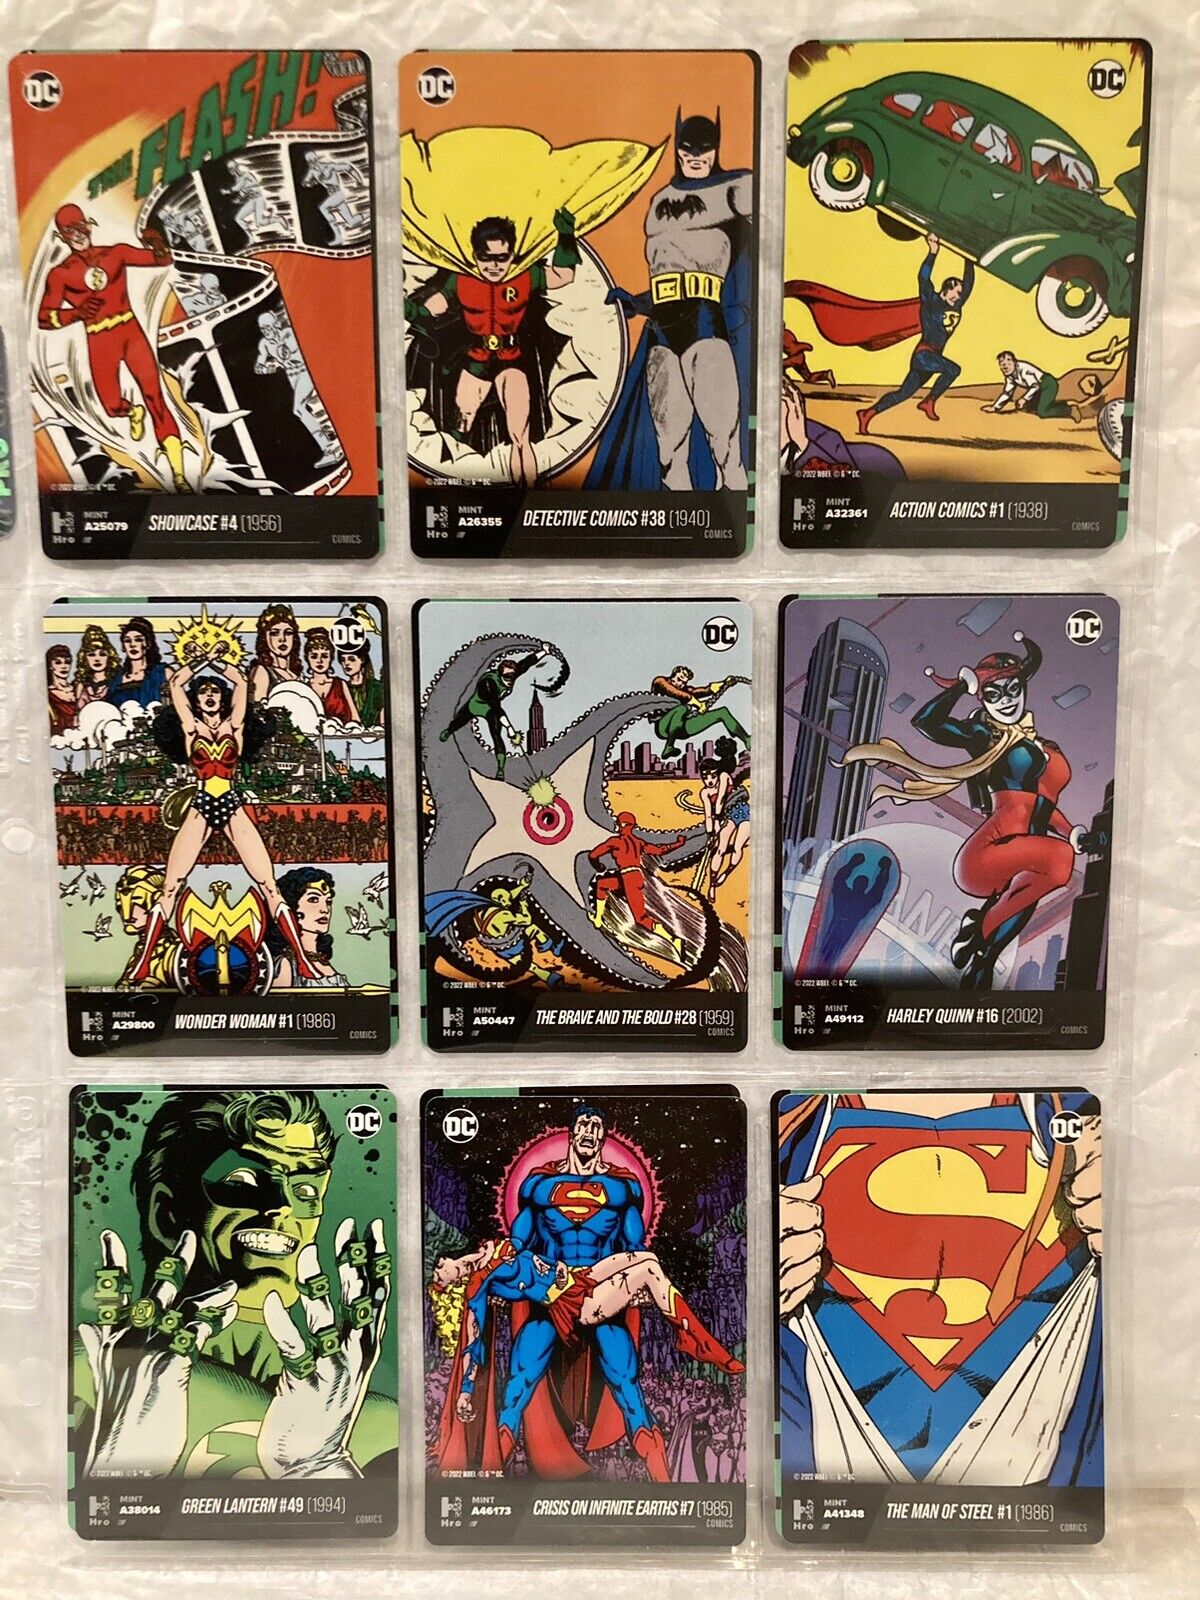 2022 HRO Chapter 1 The Batman Common - Card lot (36) - Physical only